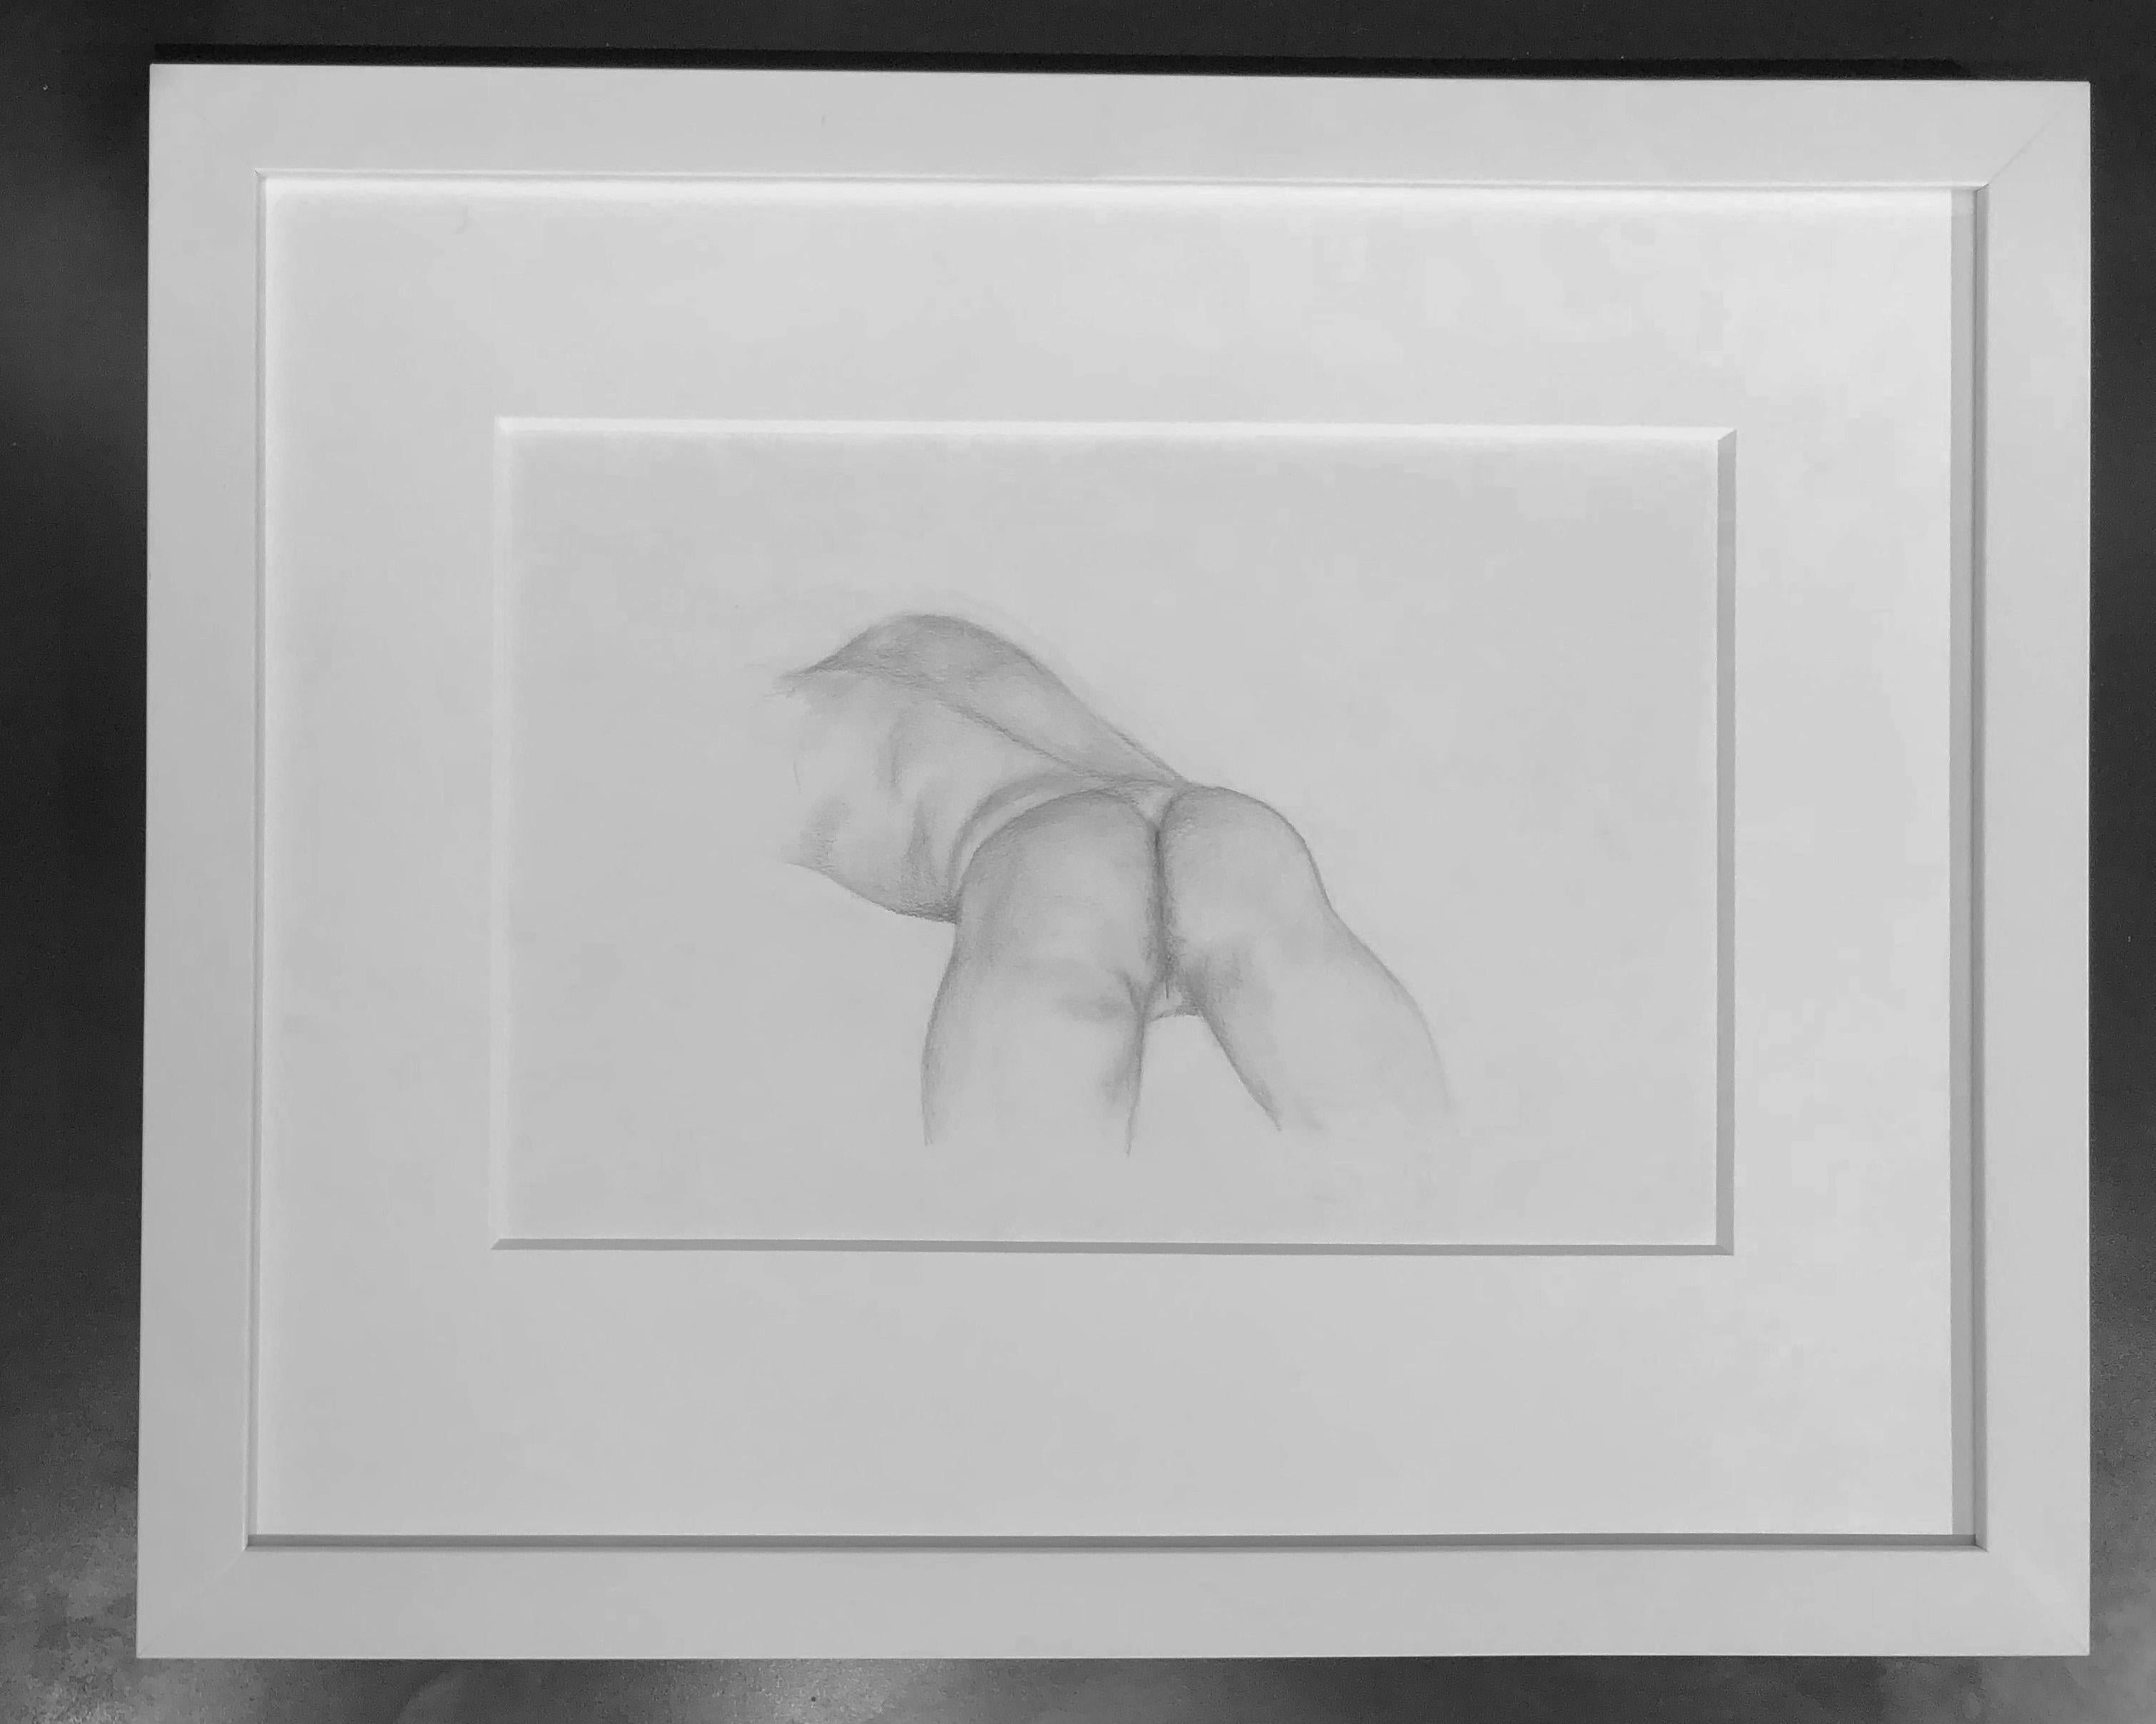 Butt - Original Graphite Drawing, Male Nude Lying Prone, Matted and Framed - Art by Rick Sindt